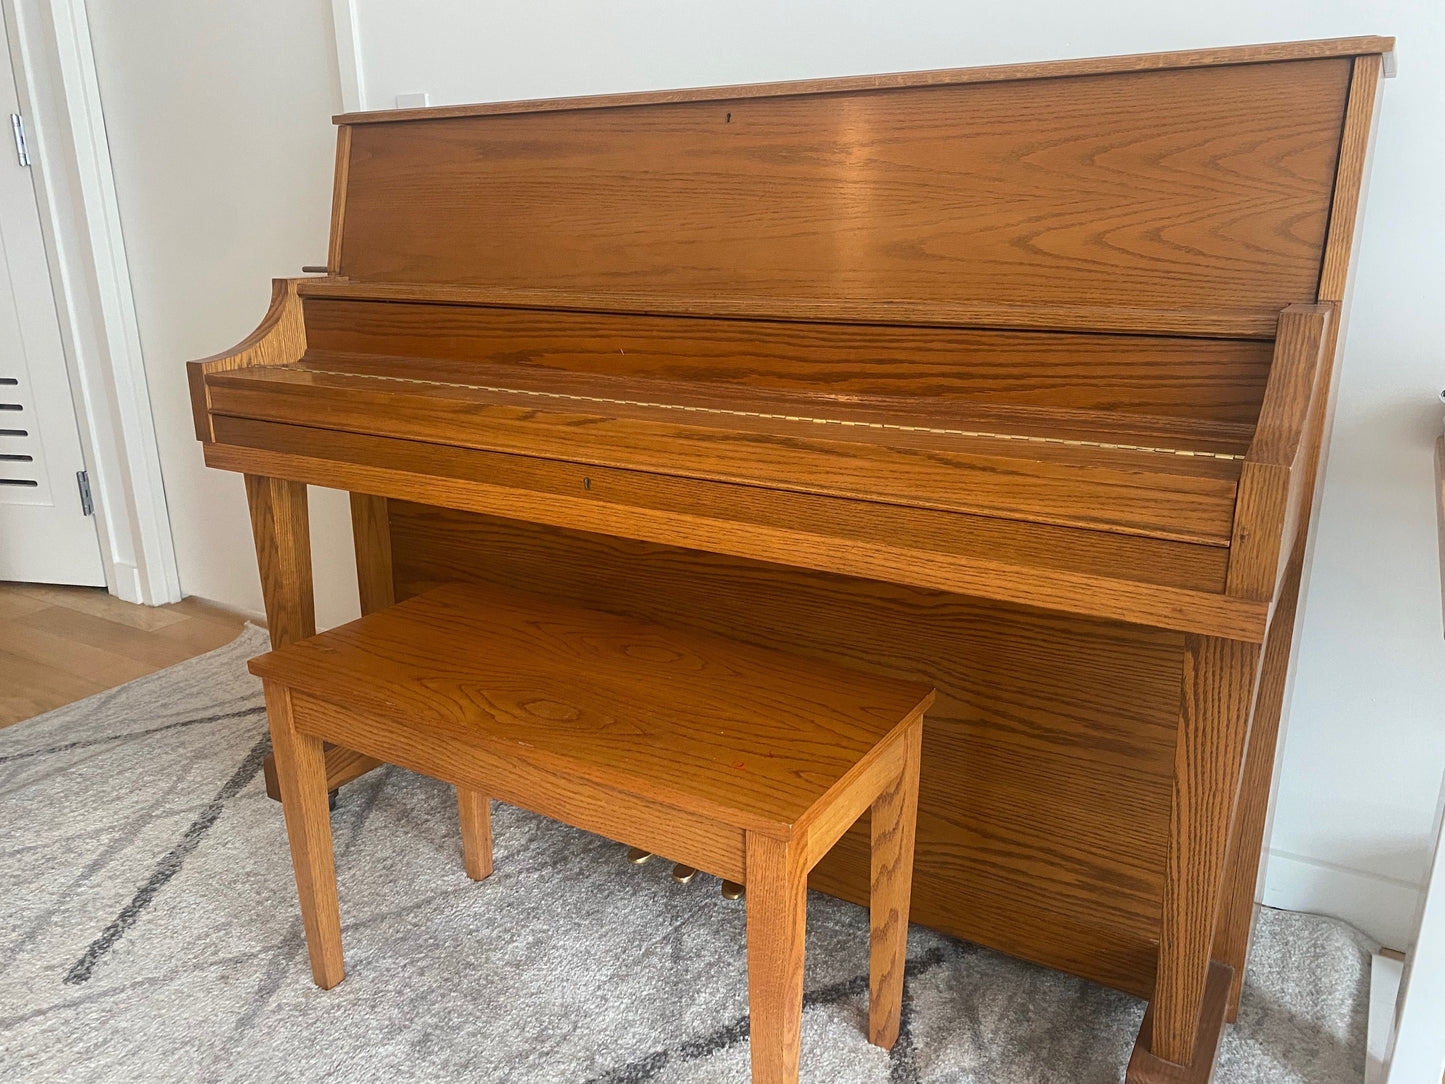 Boston Upright UP118 | Sold New in 2000